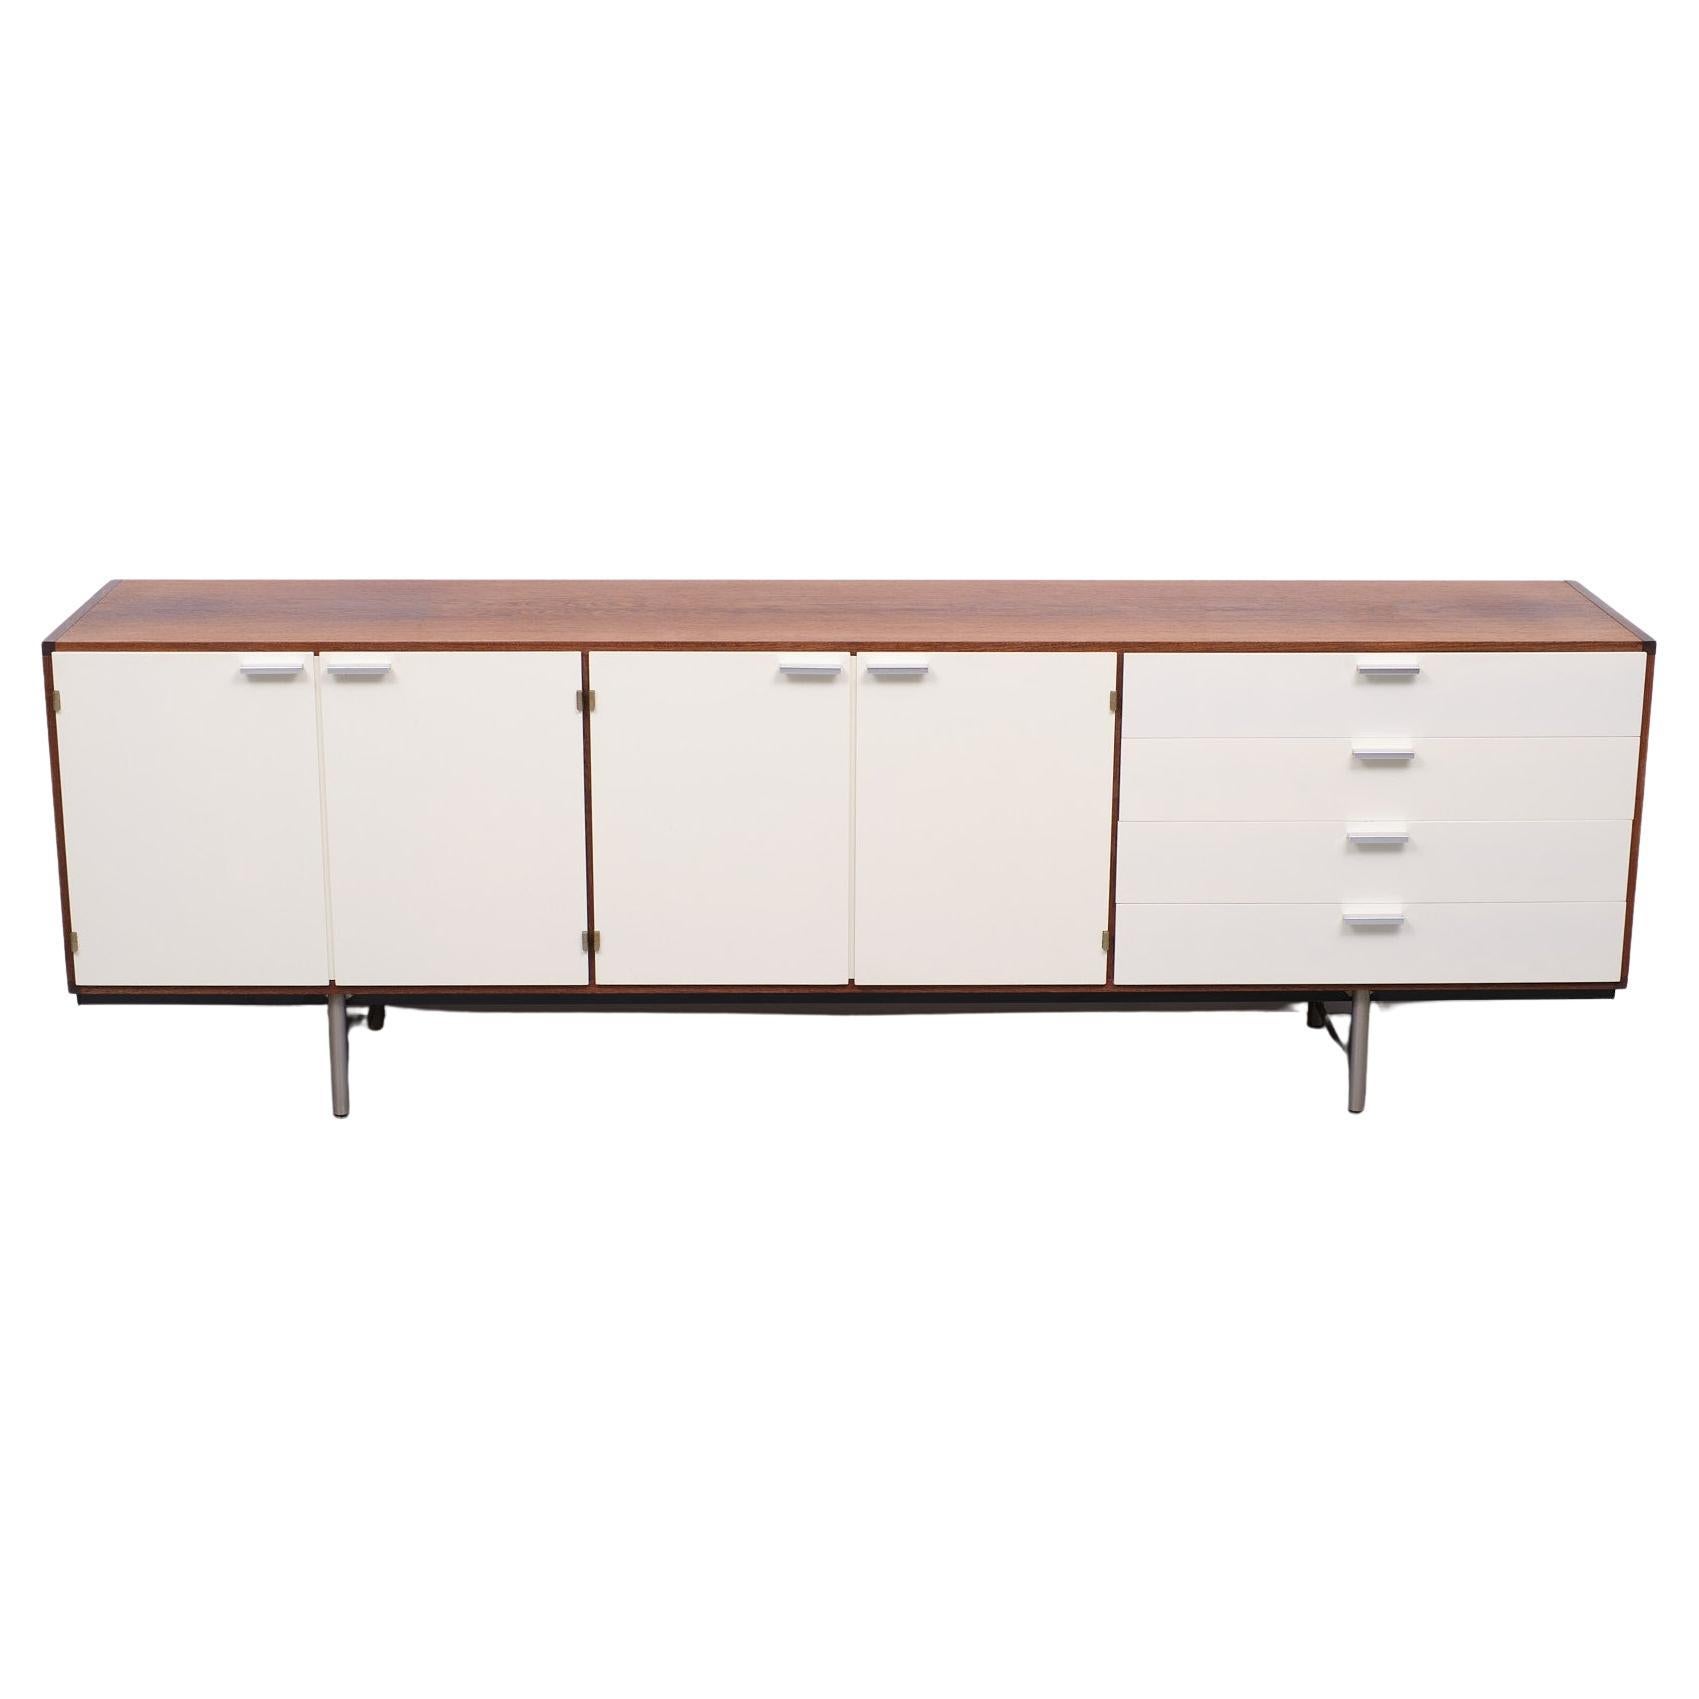 Wenge sideboard by Cees Braakman for Pastoe. This sideboard is from the Made-to-measure CR-serie. It has removable and height adjustable shelves inside. The top drawer has its original cutlery compartment. One drawer has a makers label and inside